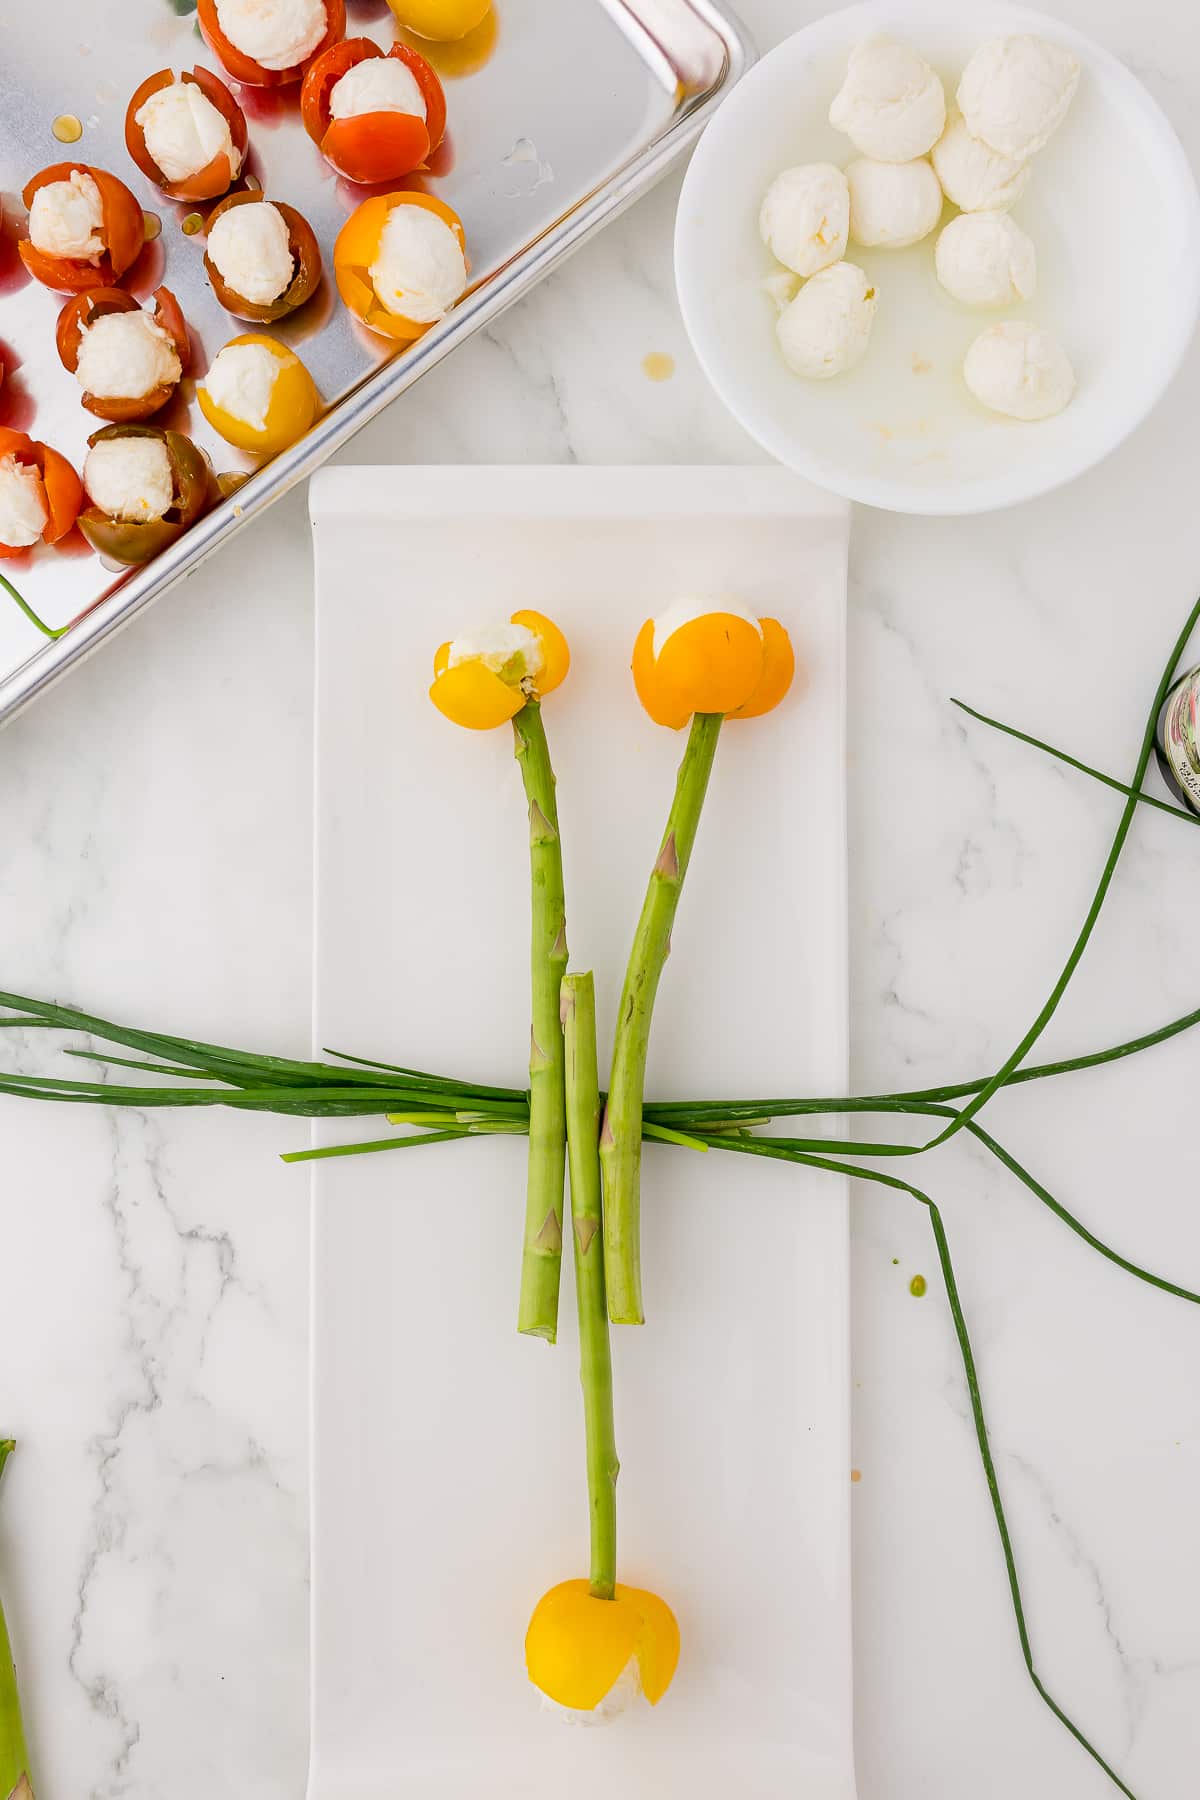 chives rope laying on a white platter with three tomato tulips on top with a white bowl with mozzarella balls and and a cookie sheet with tomato tulips ready to be speared with asparagus